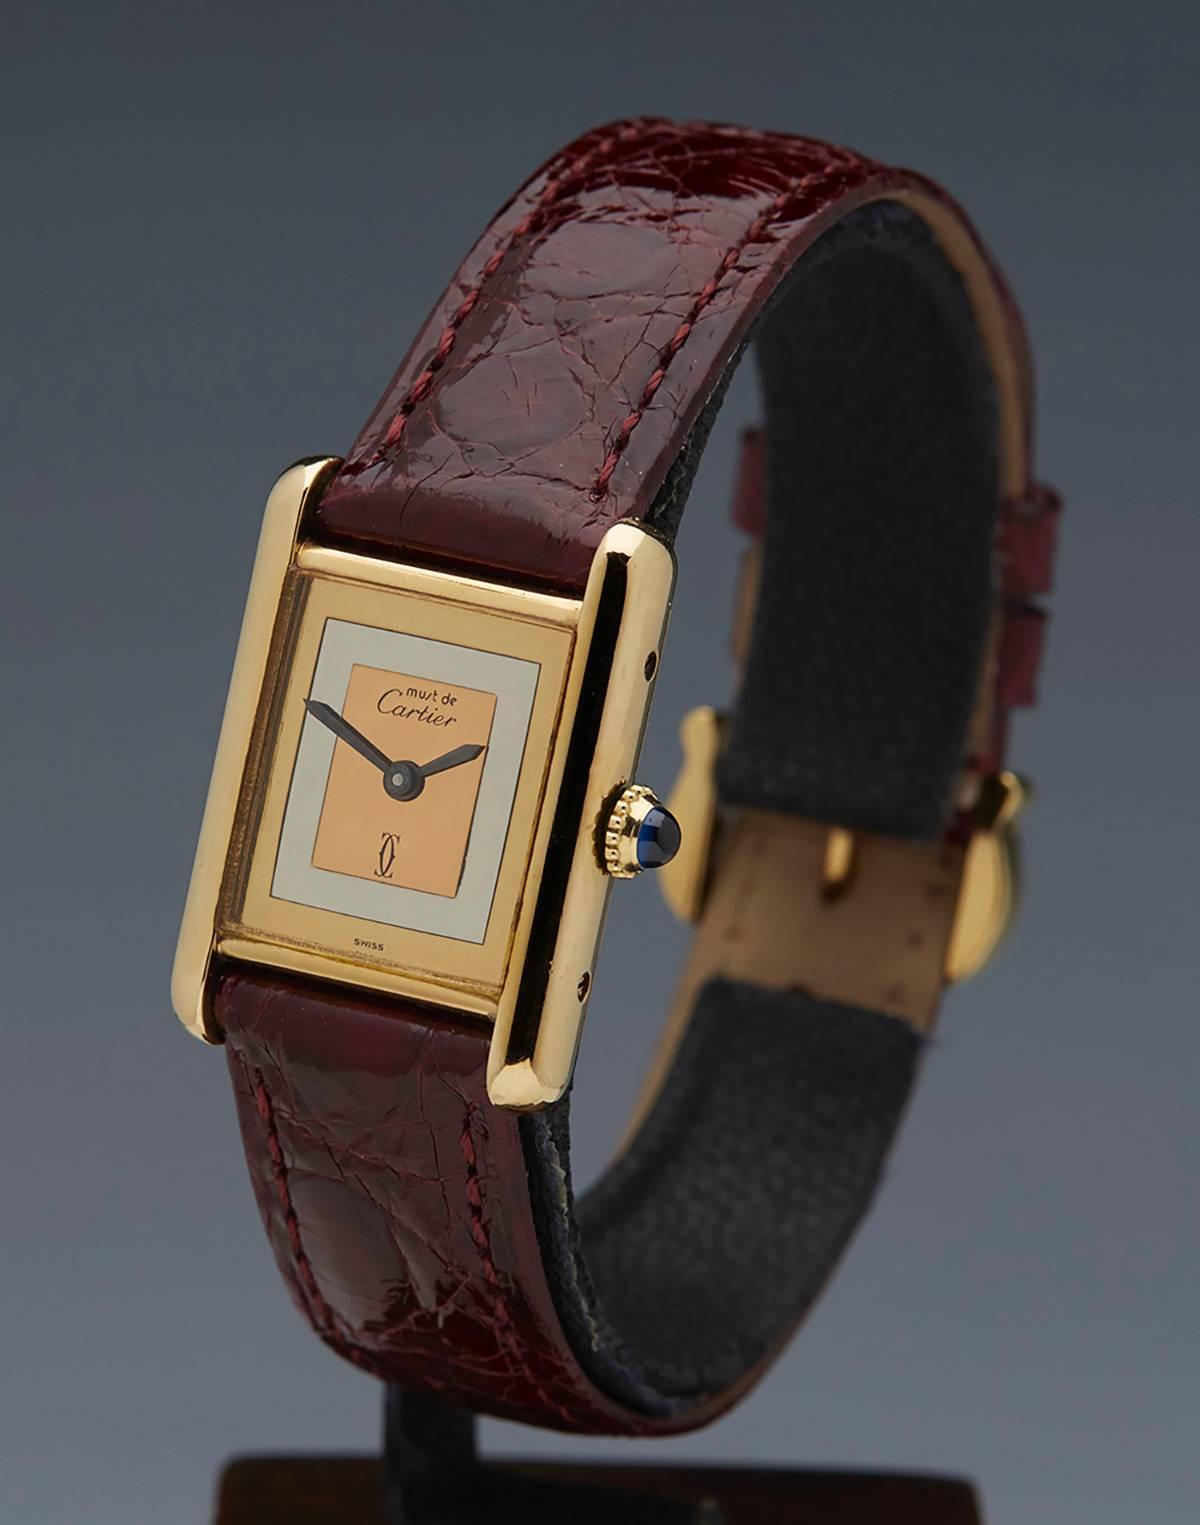 Specifications

Movement: Mechanical Manual Wind
Case: 18k Yellow Gold Plated 925 Silver
Case Diameter: 22mm by 28mm
Dial: Tri Colour Gold Dial
Bracelet: Cartier Burgundy Crocodile Leather
Strap Length: Adjustable
Strap Width: At Case -